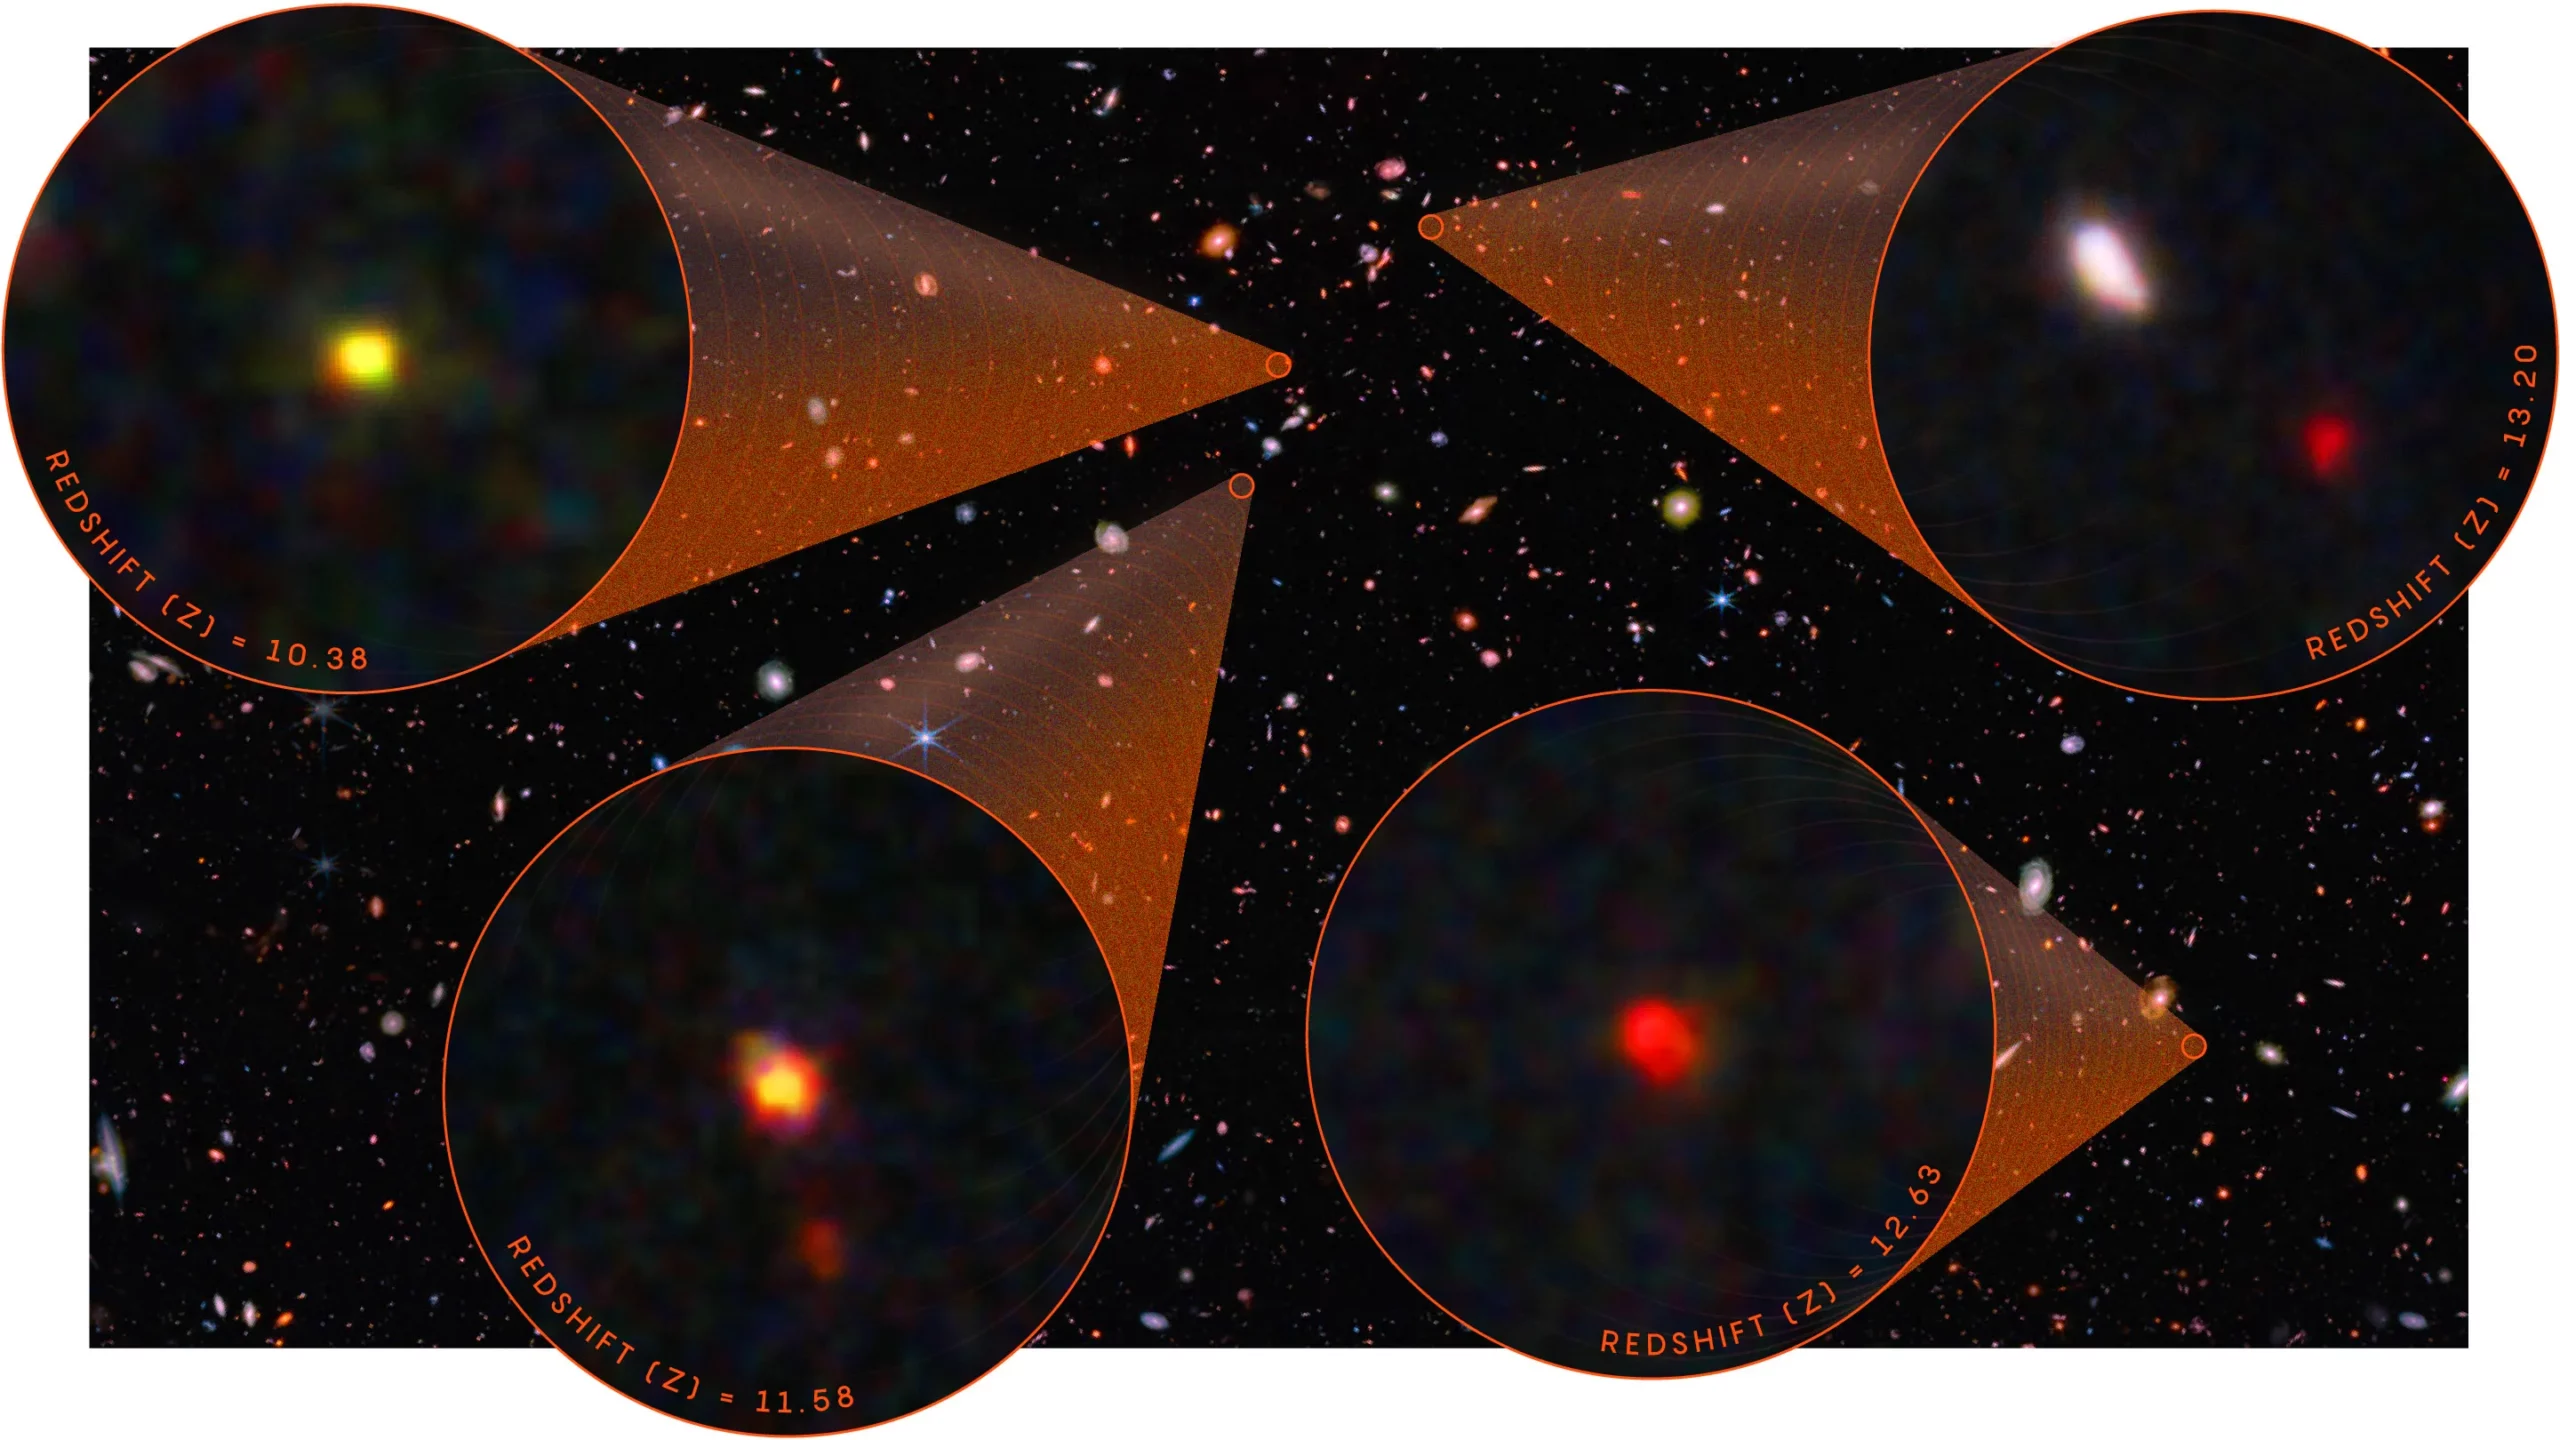 Standard Model of Cosmology Survives a Telescope’s Surprising Finds